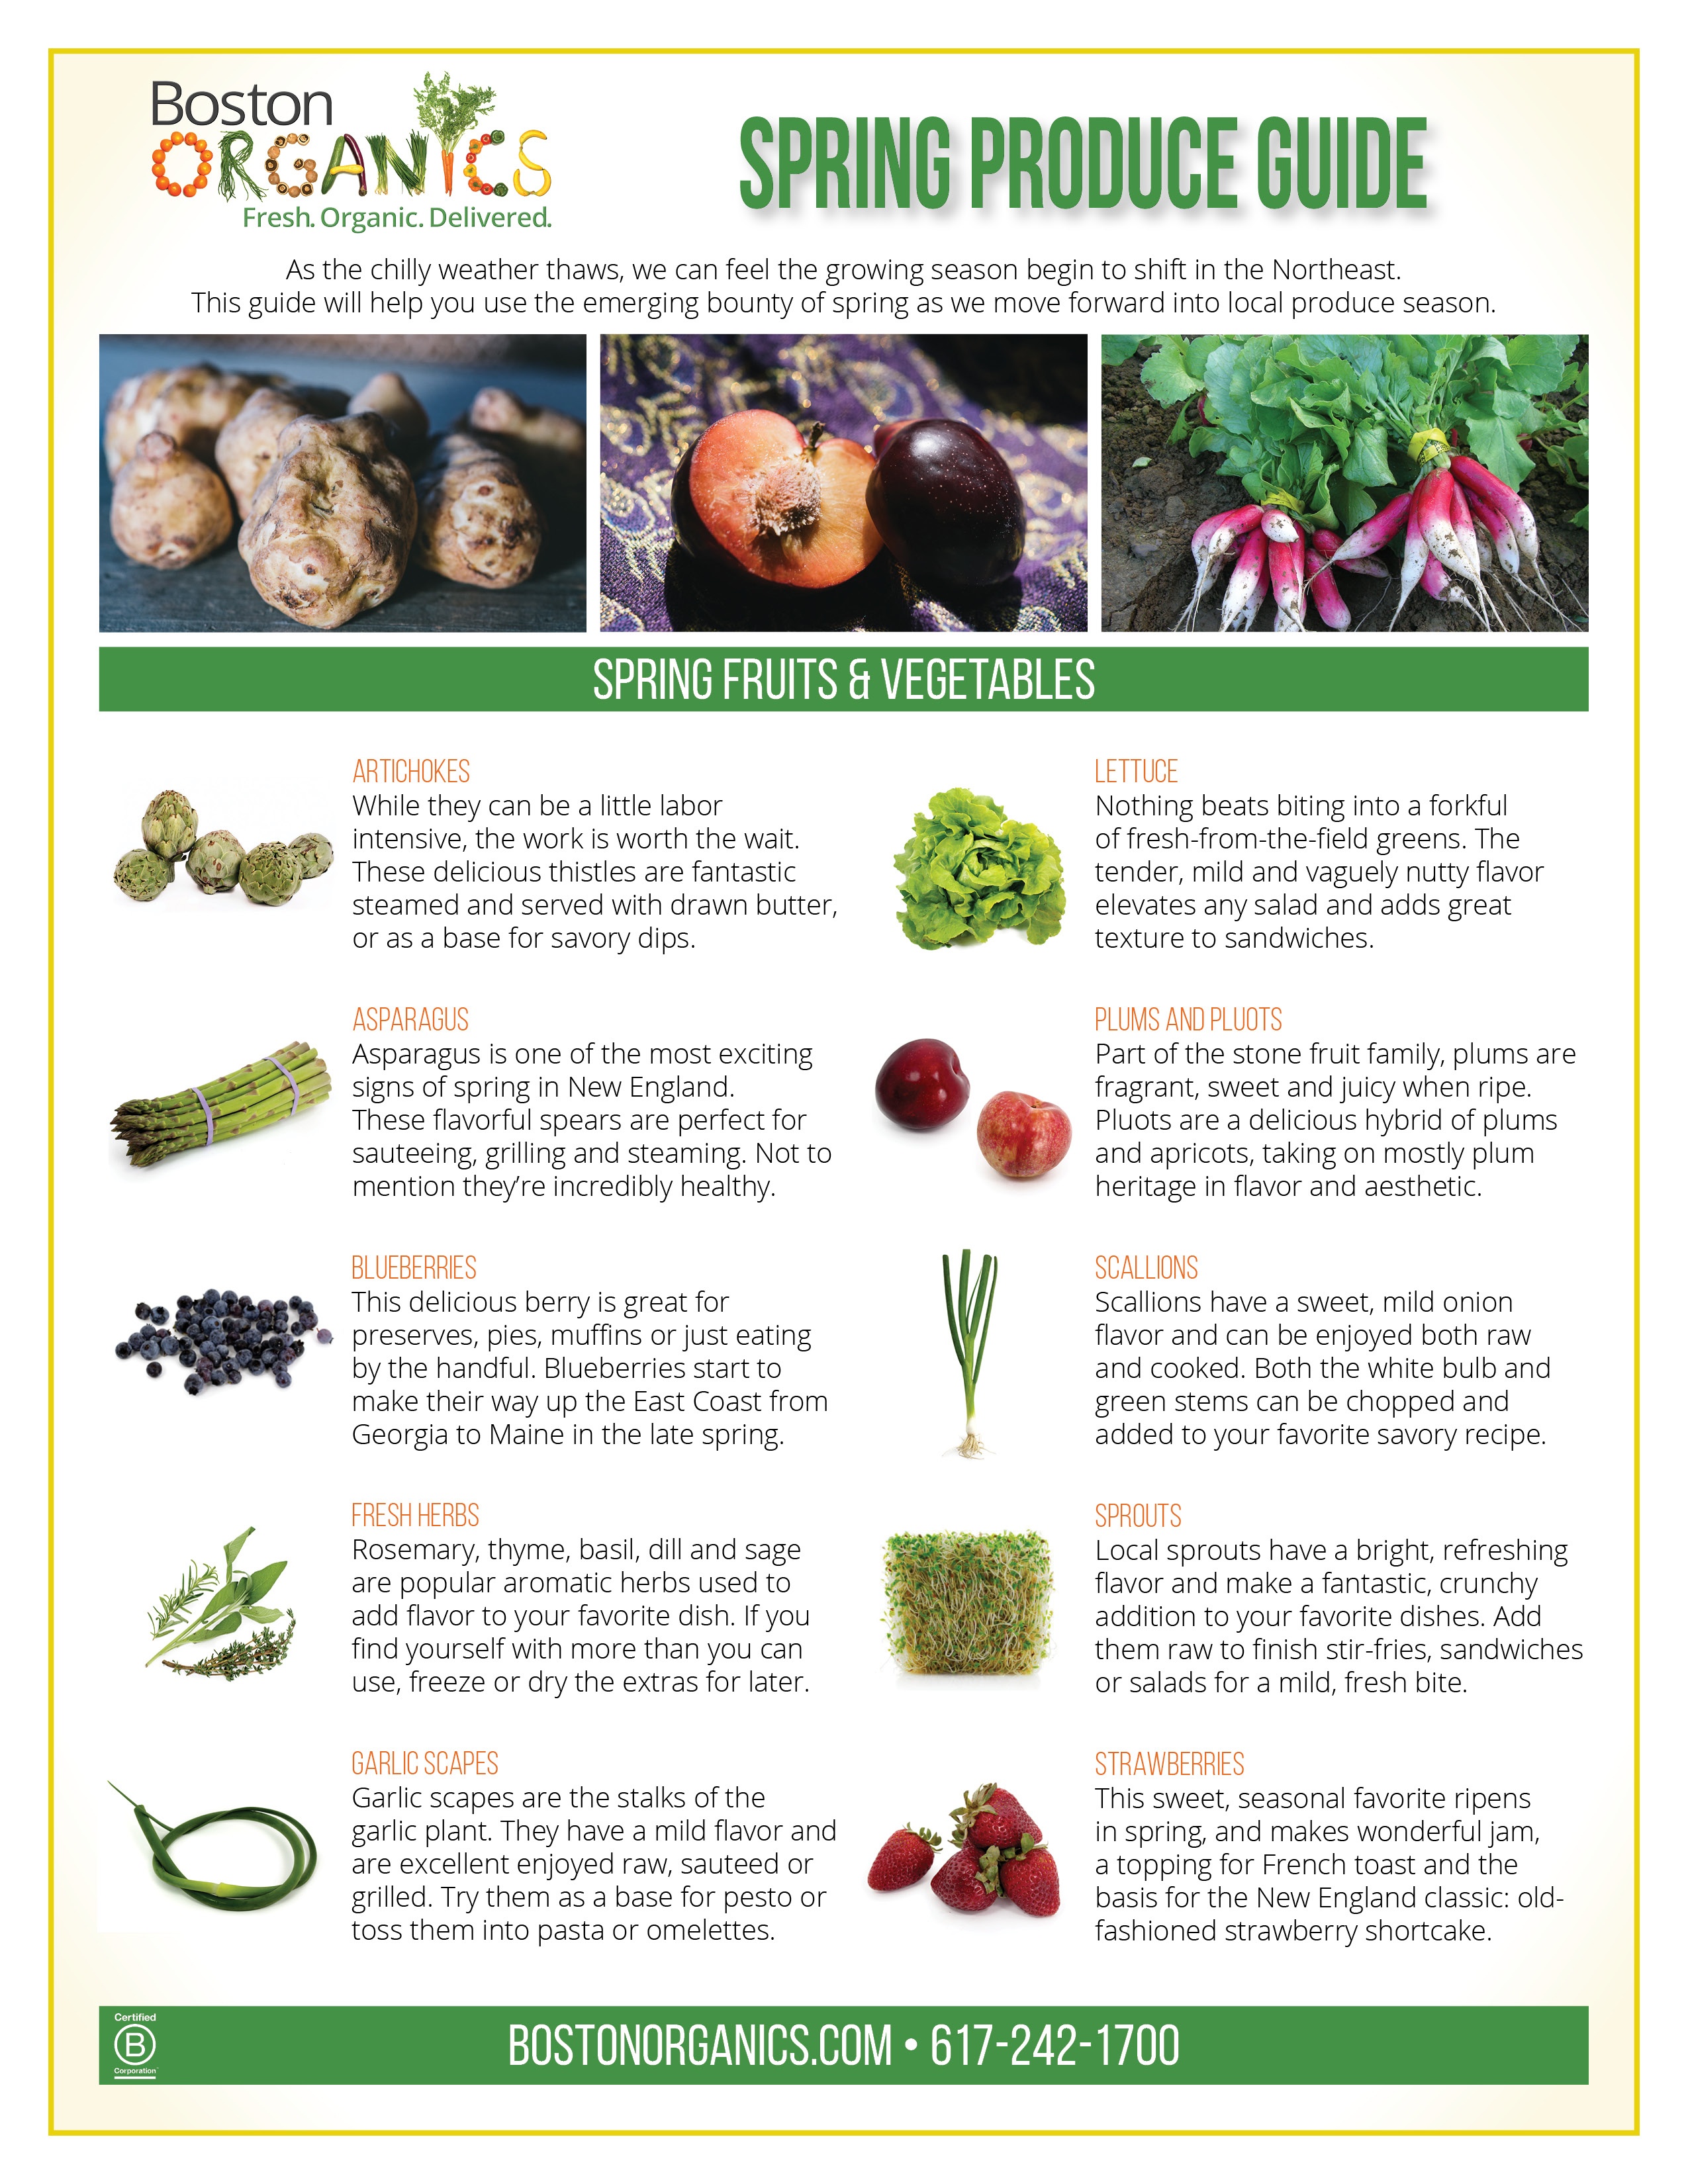 2018 Spring Produce Guide